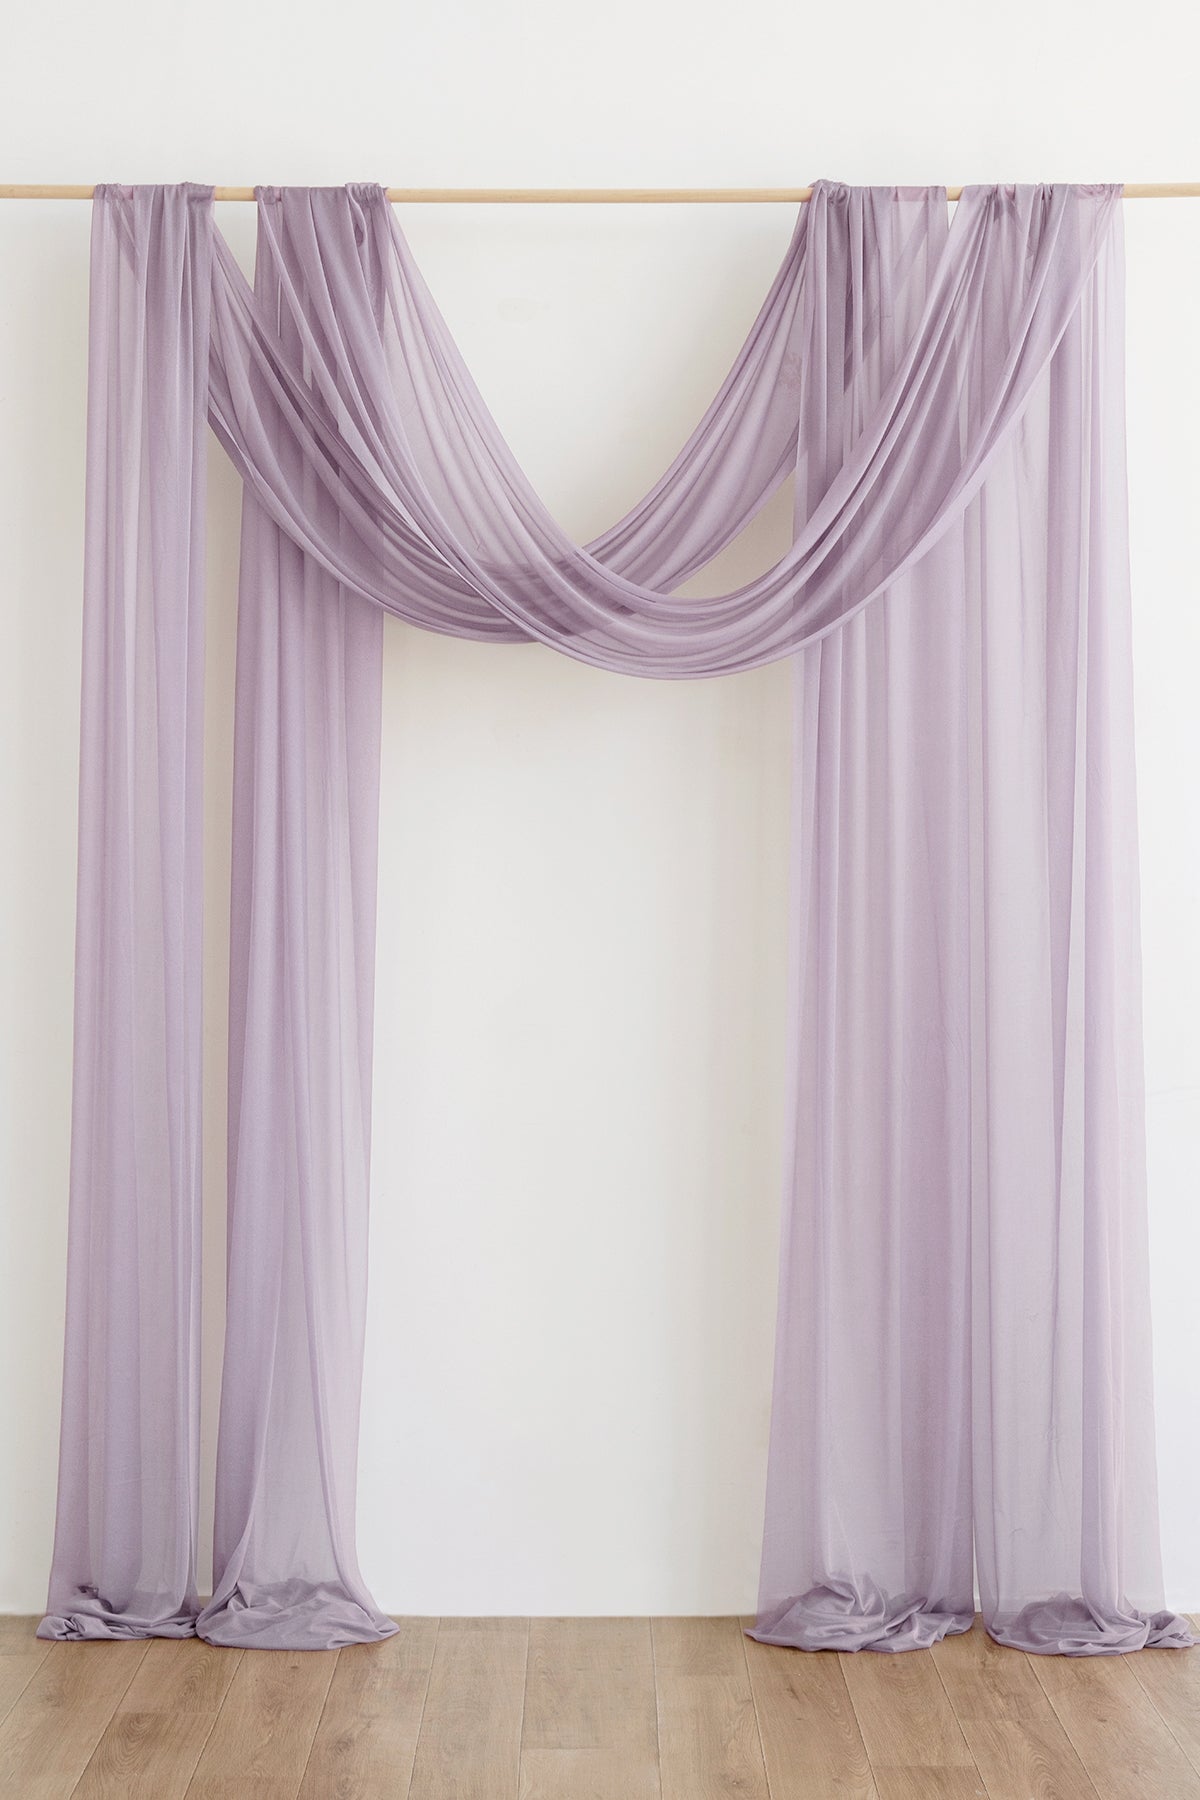 Wedding Arch Drapes in Lavender Aster & Burnt Orange | Clearance